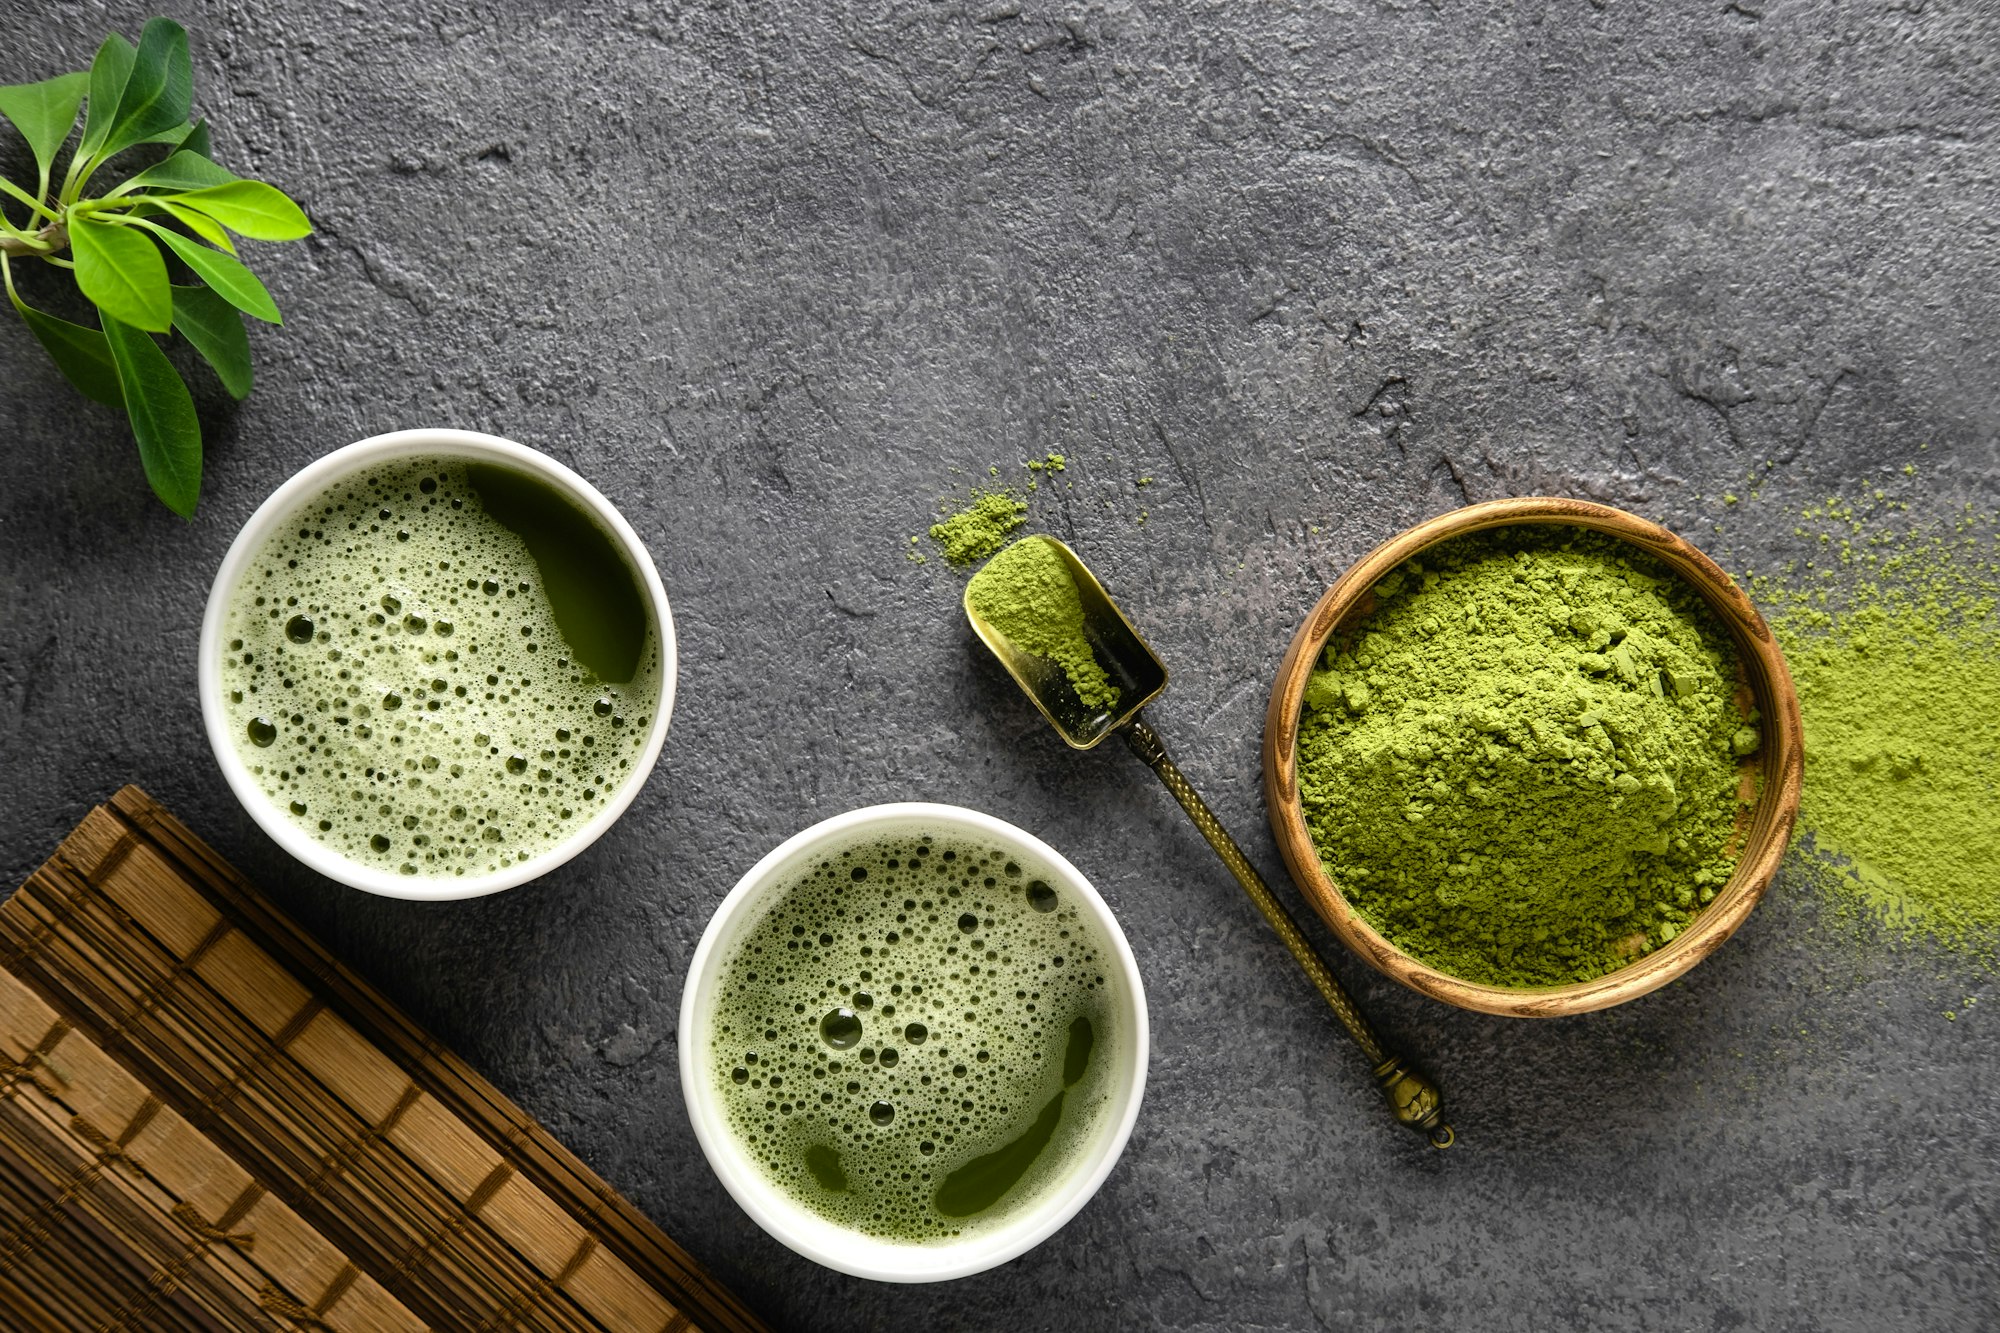 Matcha Vs. Regular Green Tea: What's The Difference?